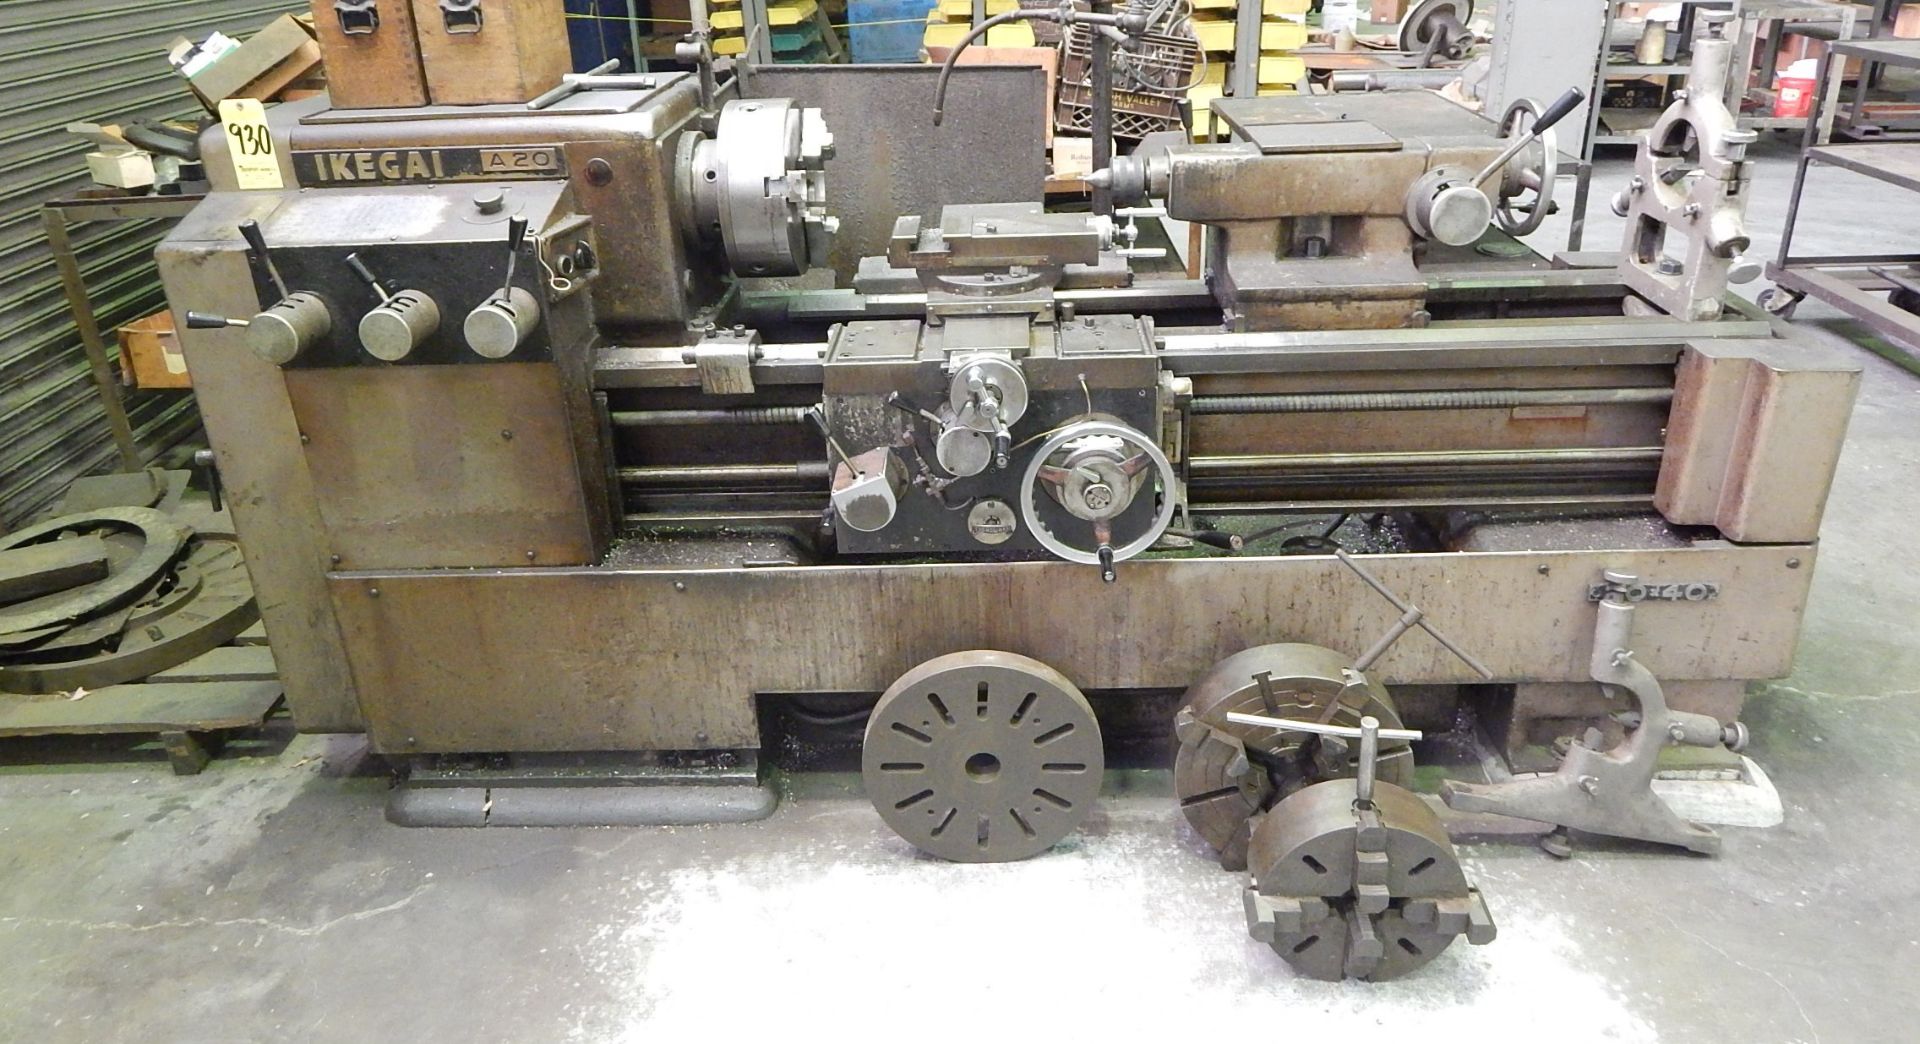 Ikegai Model A20 Engine Lathe, s/n 9534T, 20 In. X 60 In. Capacity, Inch/Metric,12 Inch 3-Jaw Chuck,